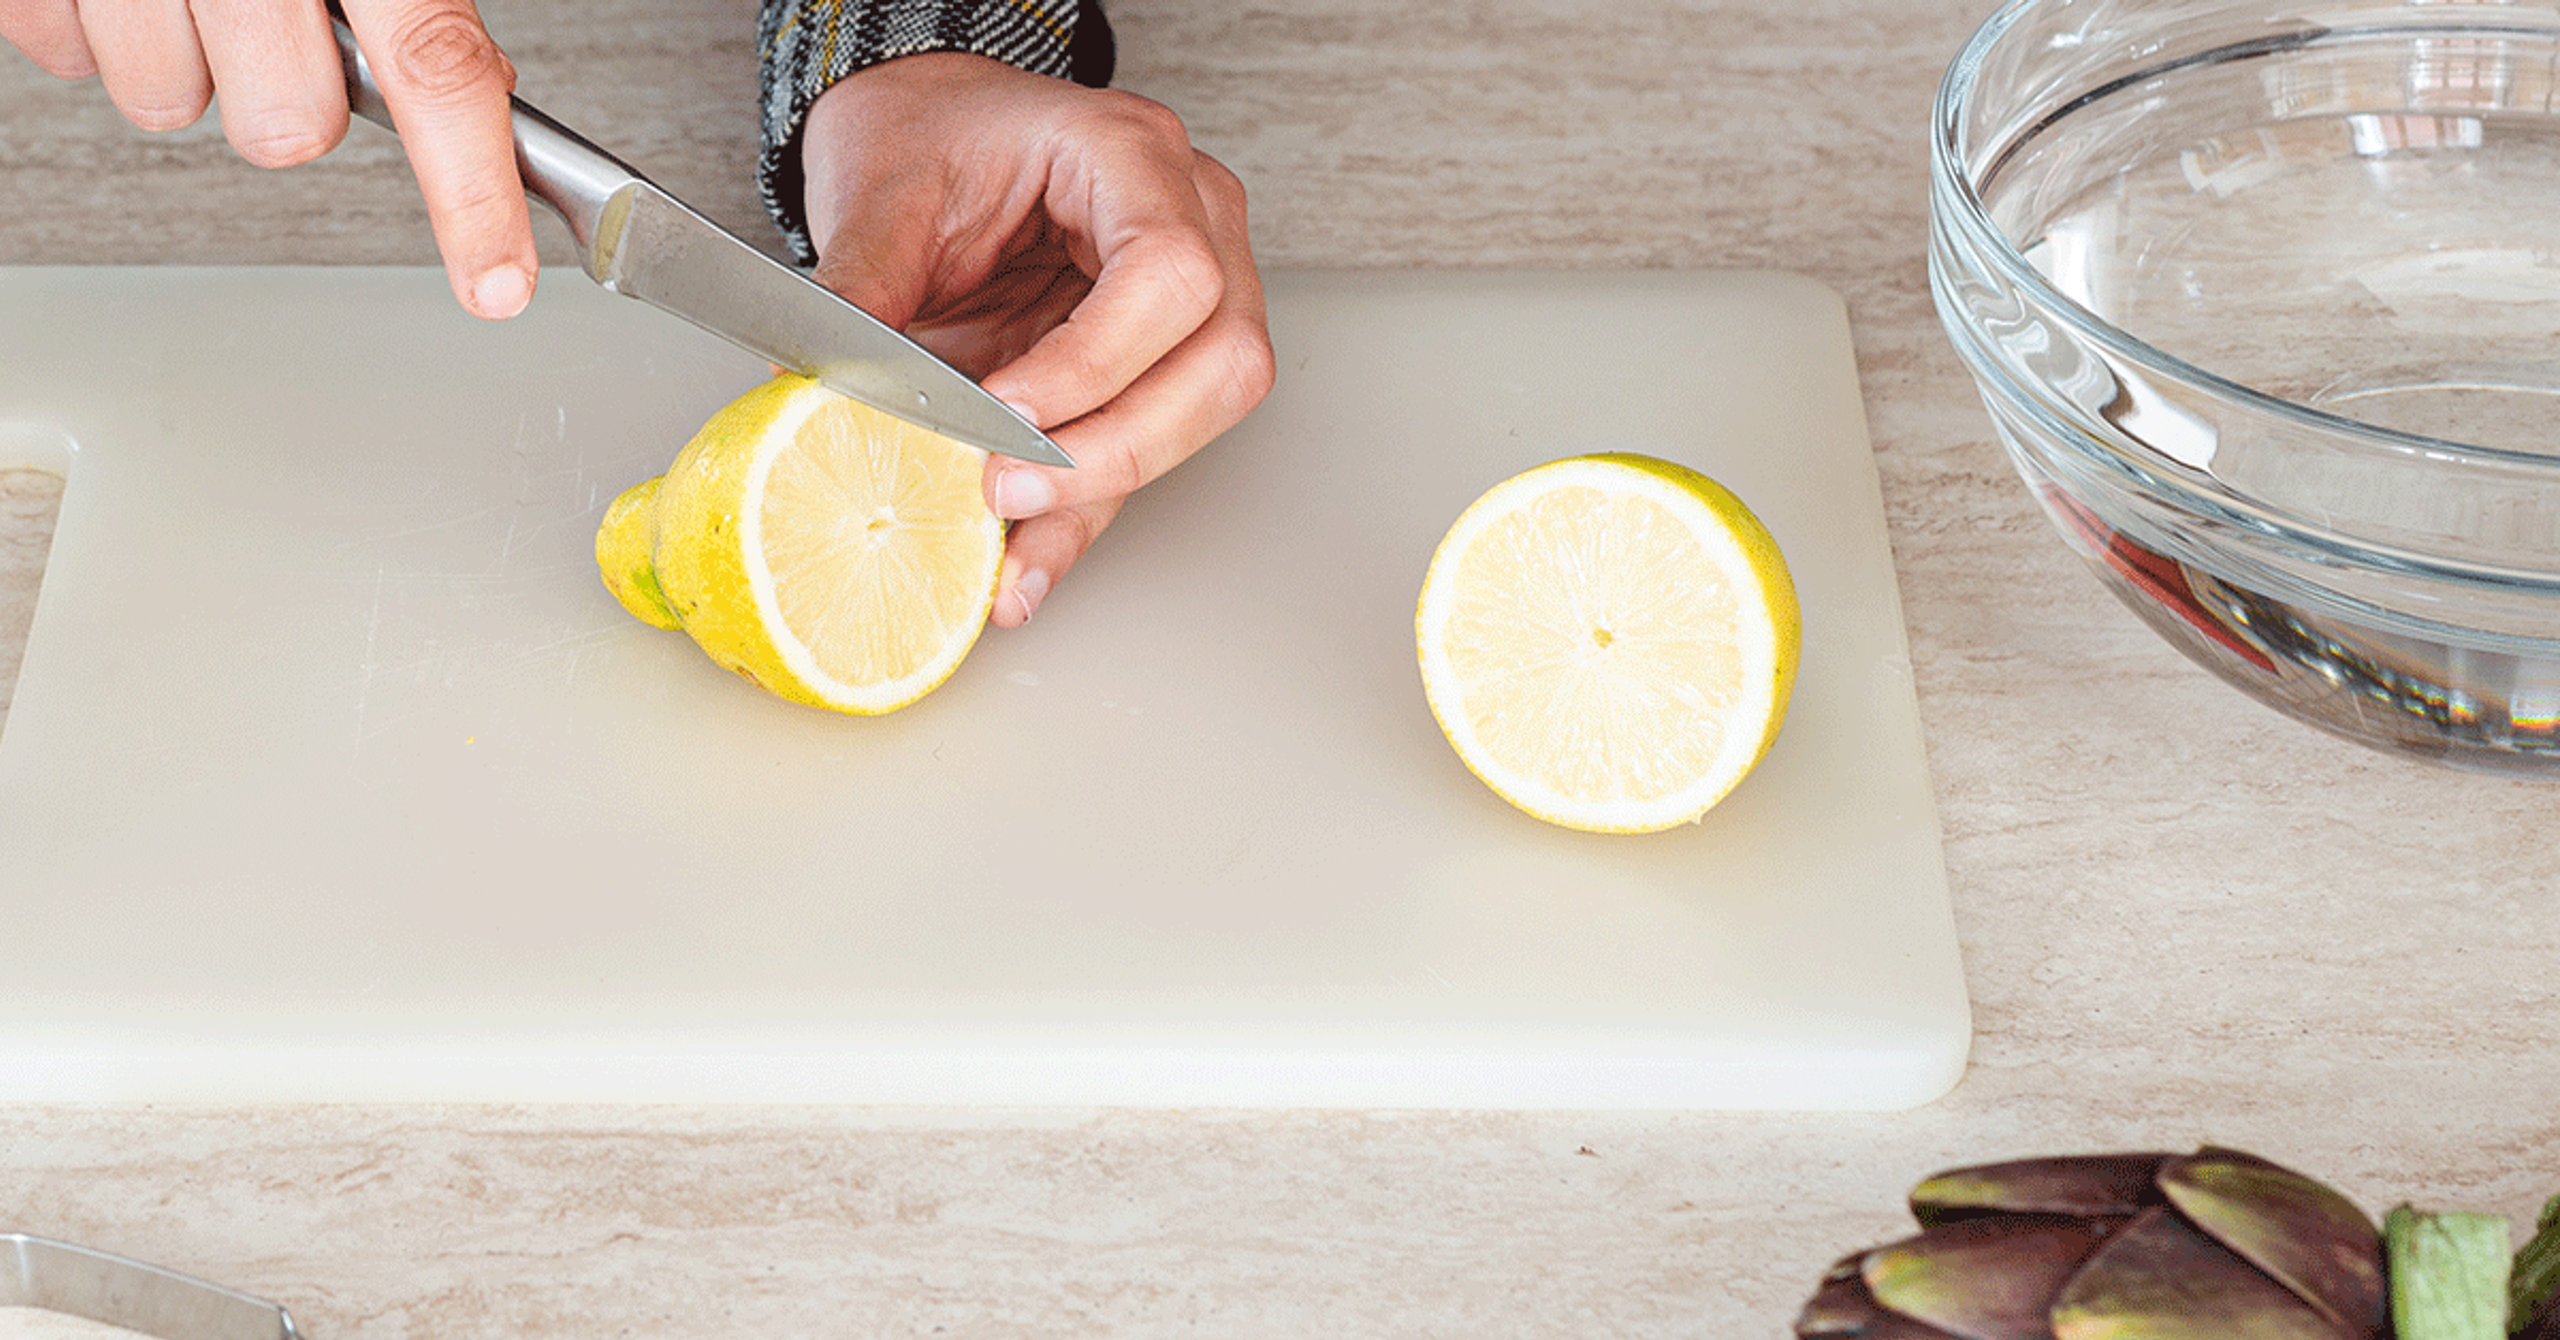 Are plastic cutting boards releasing microplastics into our homes